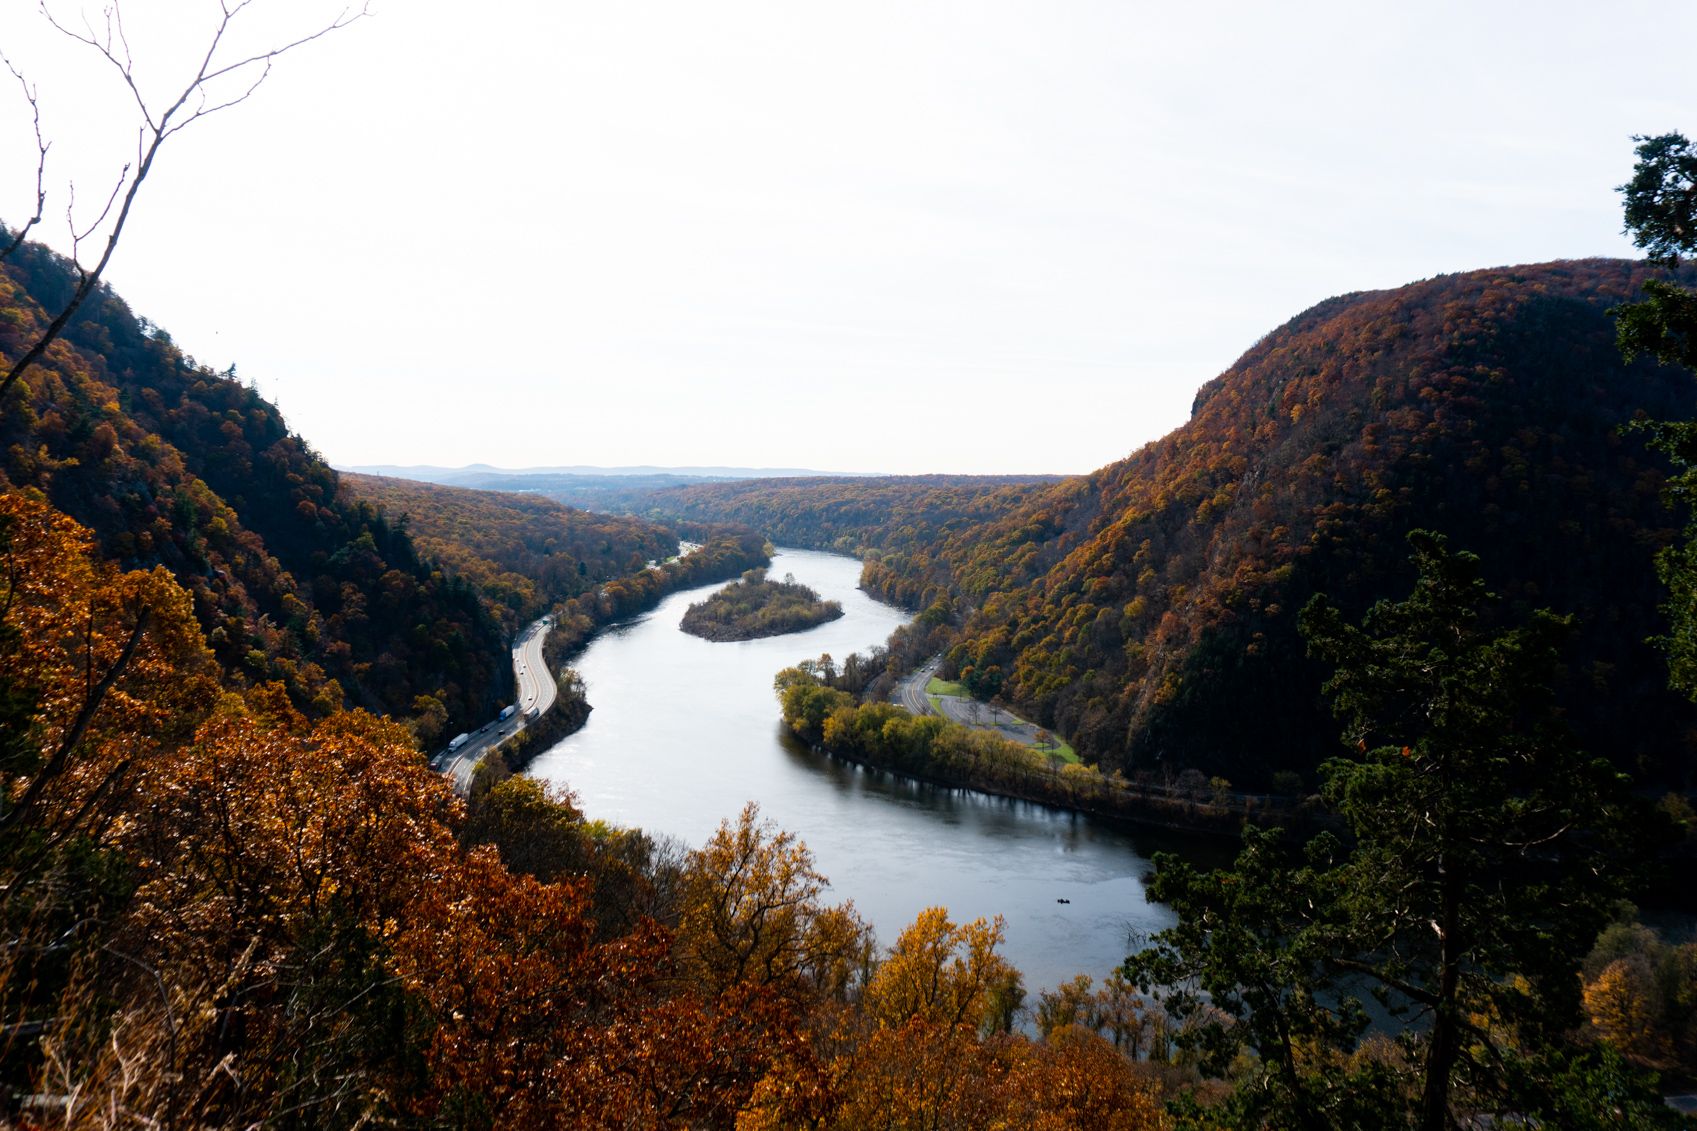 View of the water gap from halways up Mount Tammany at the Delaware Water Gap